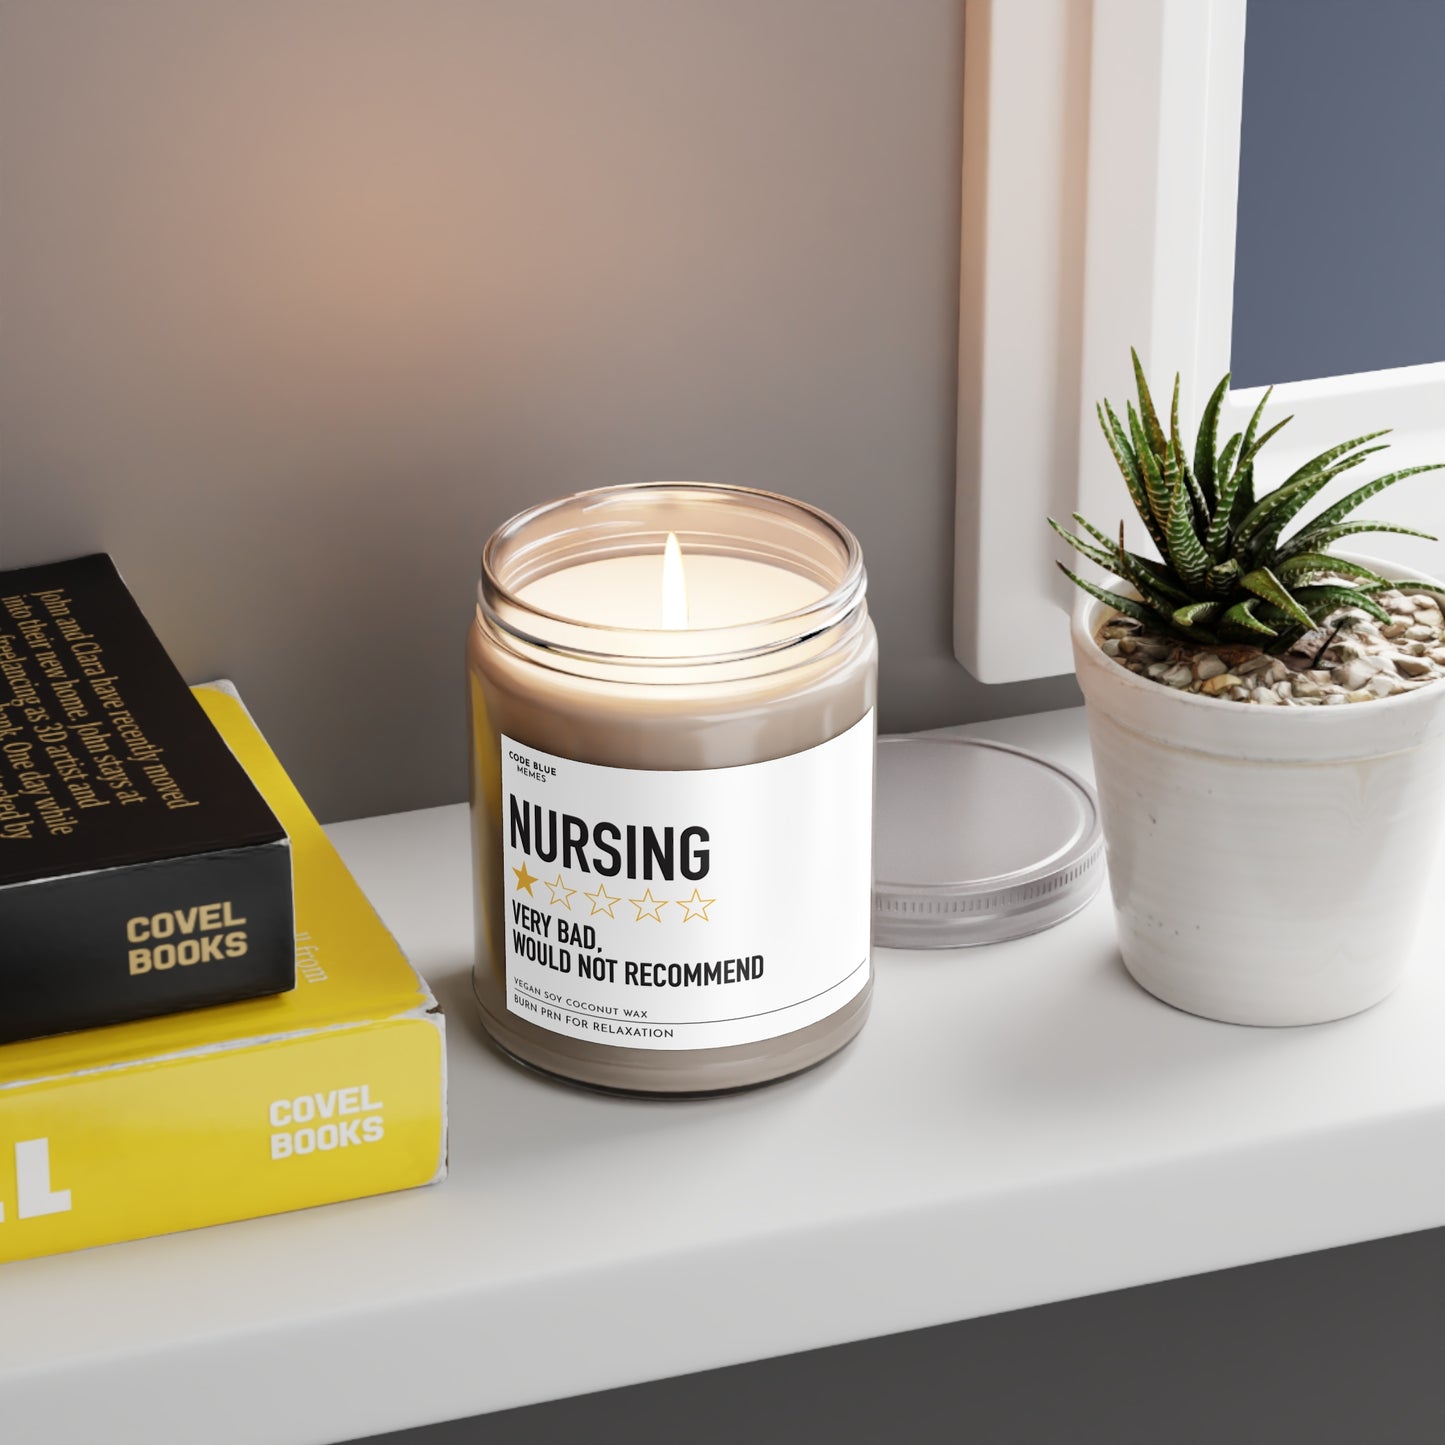 Nursing Very Bad, Would Not Recommend - Scented Candle